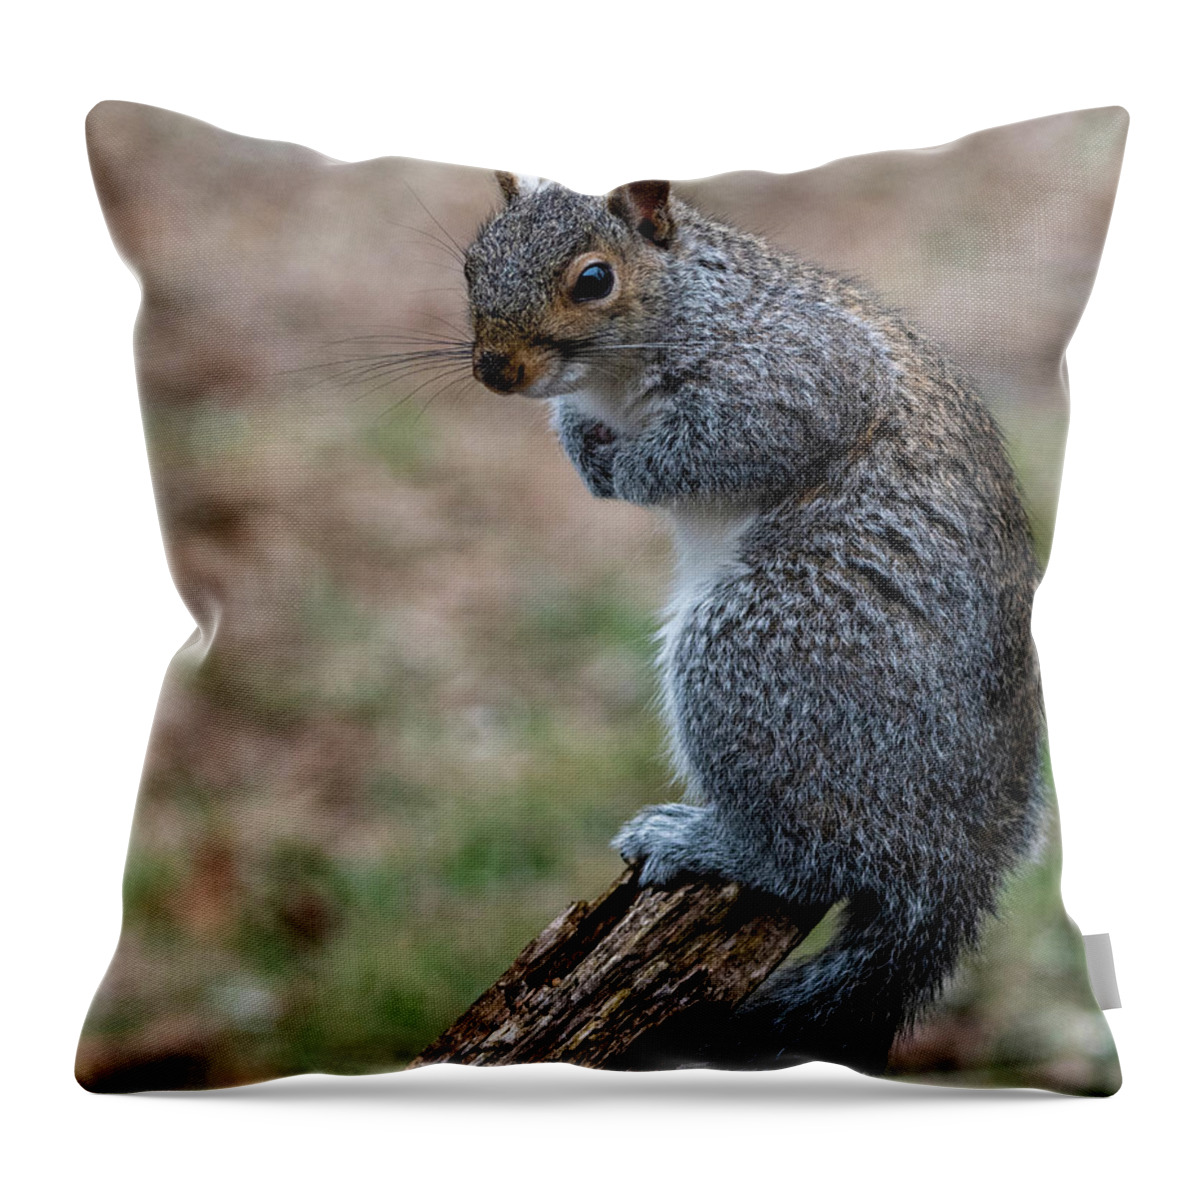 Mammal Throw Pillow featuring the photograph Posted by Cathy Kovarik